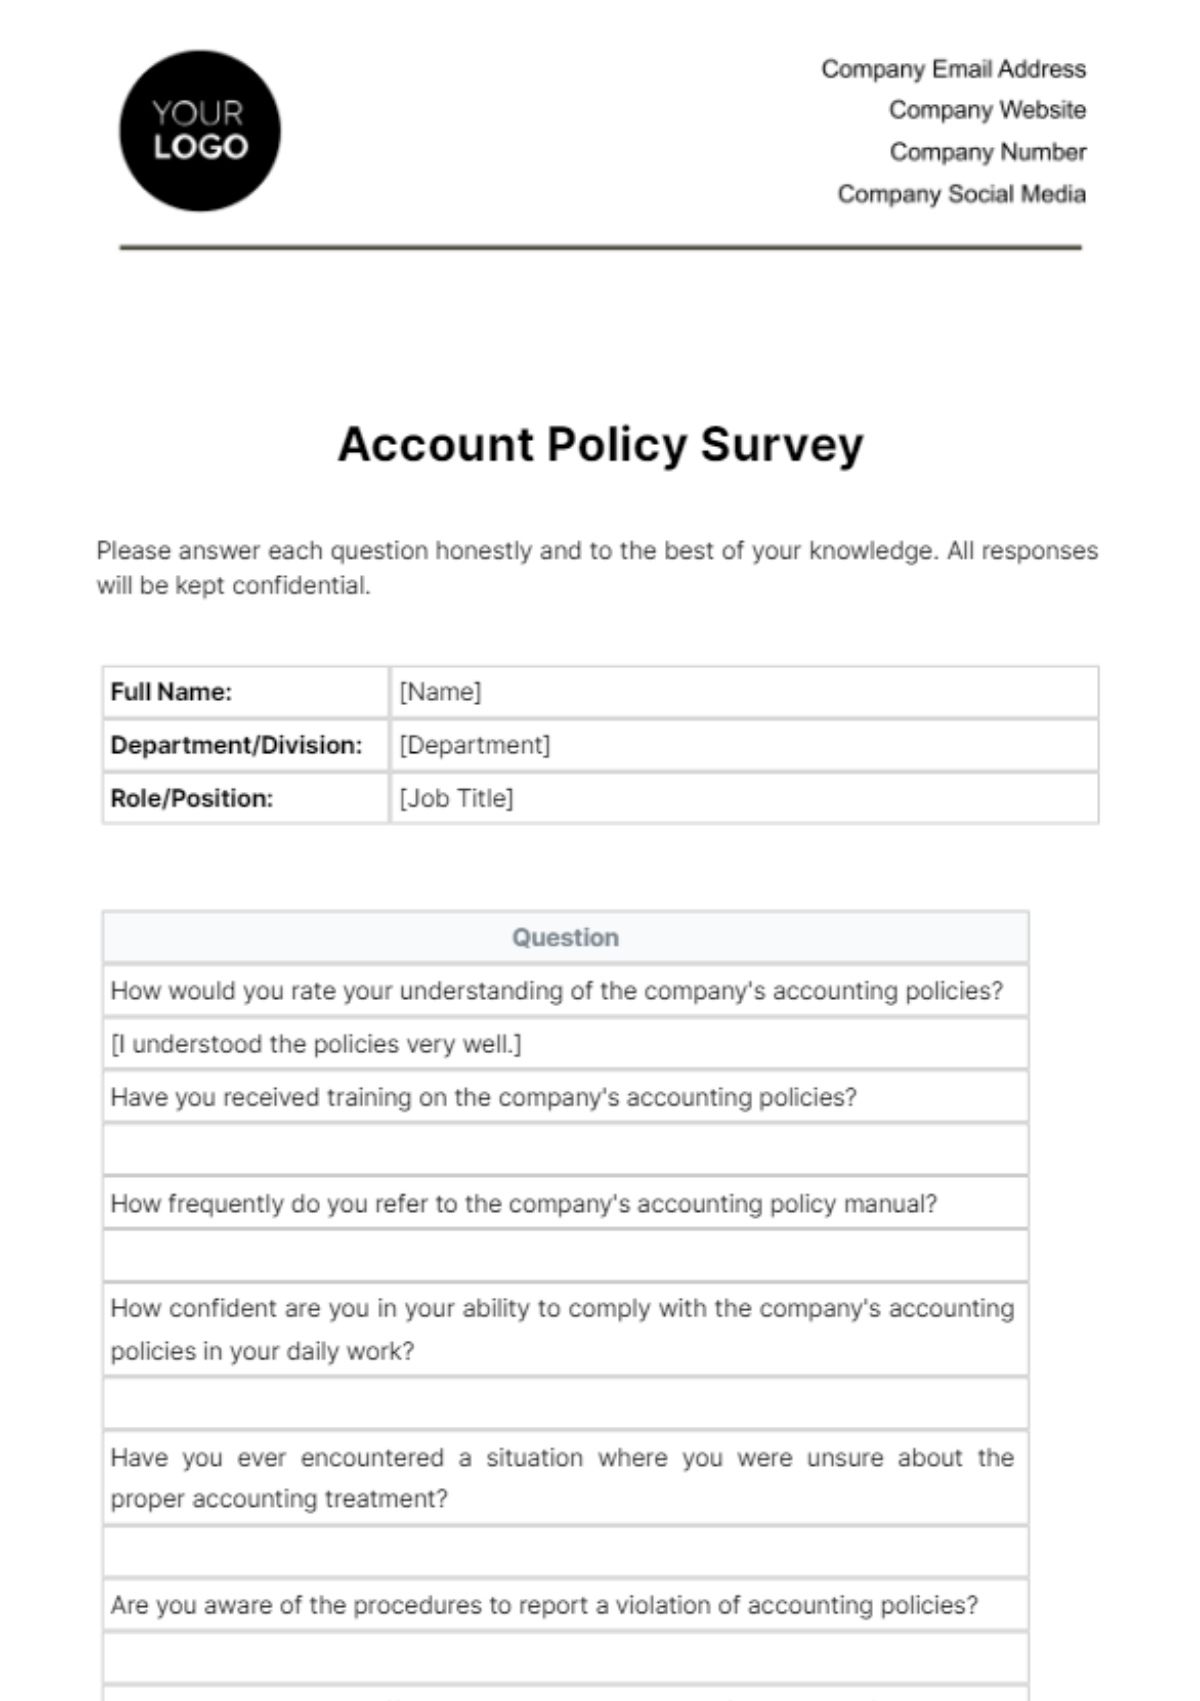 Account Policy Survey Template